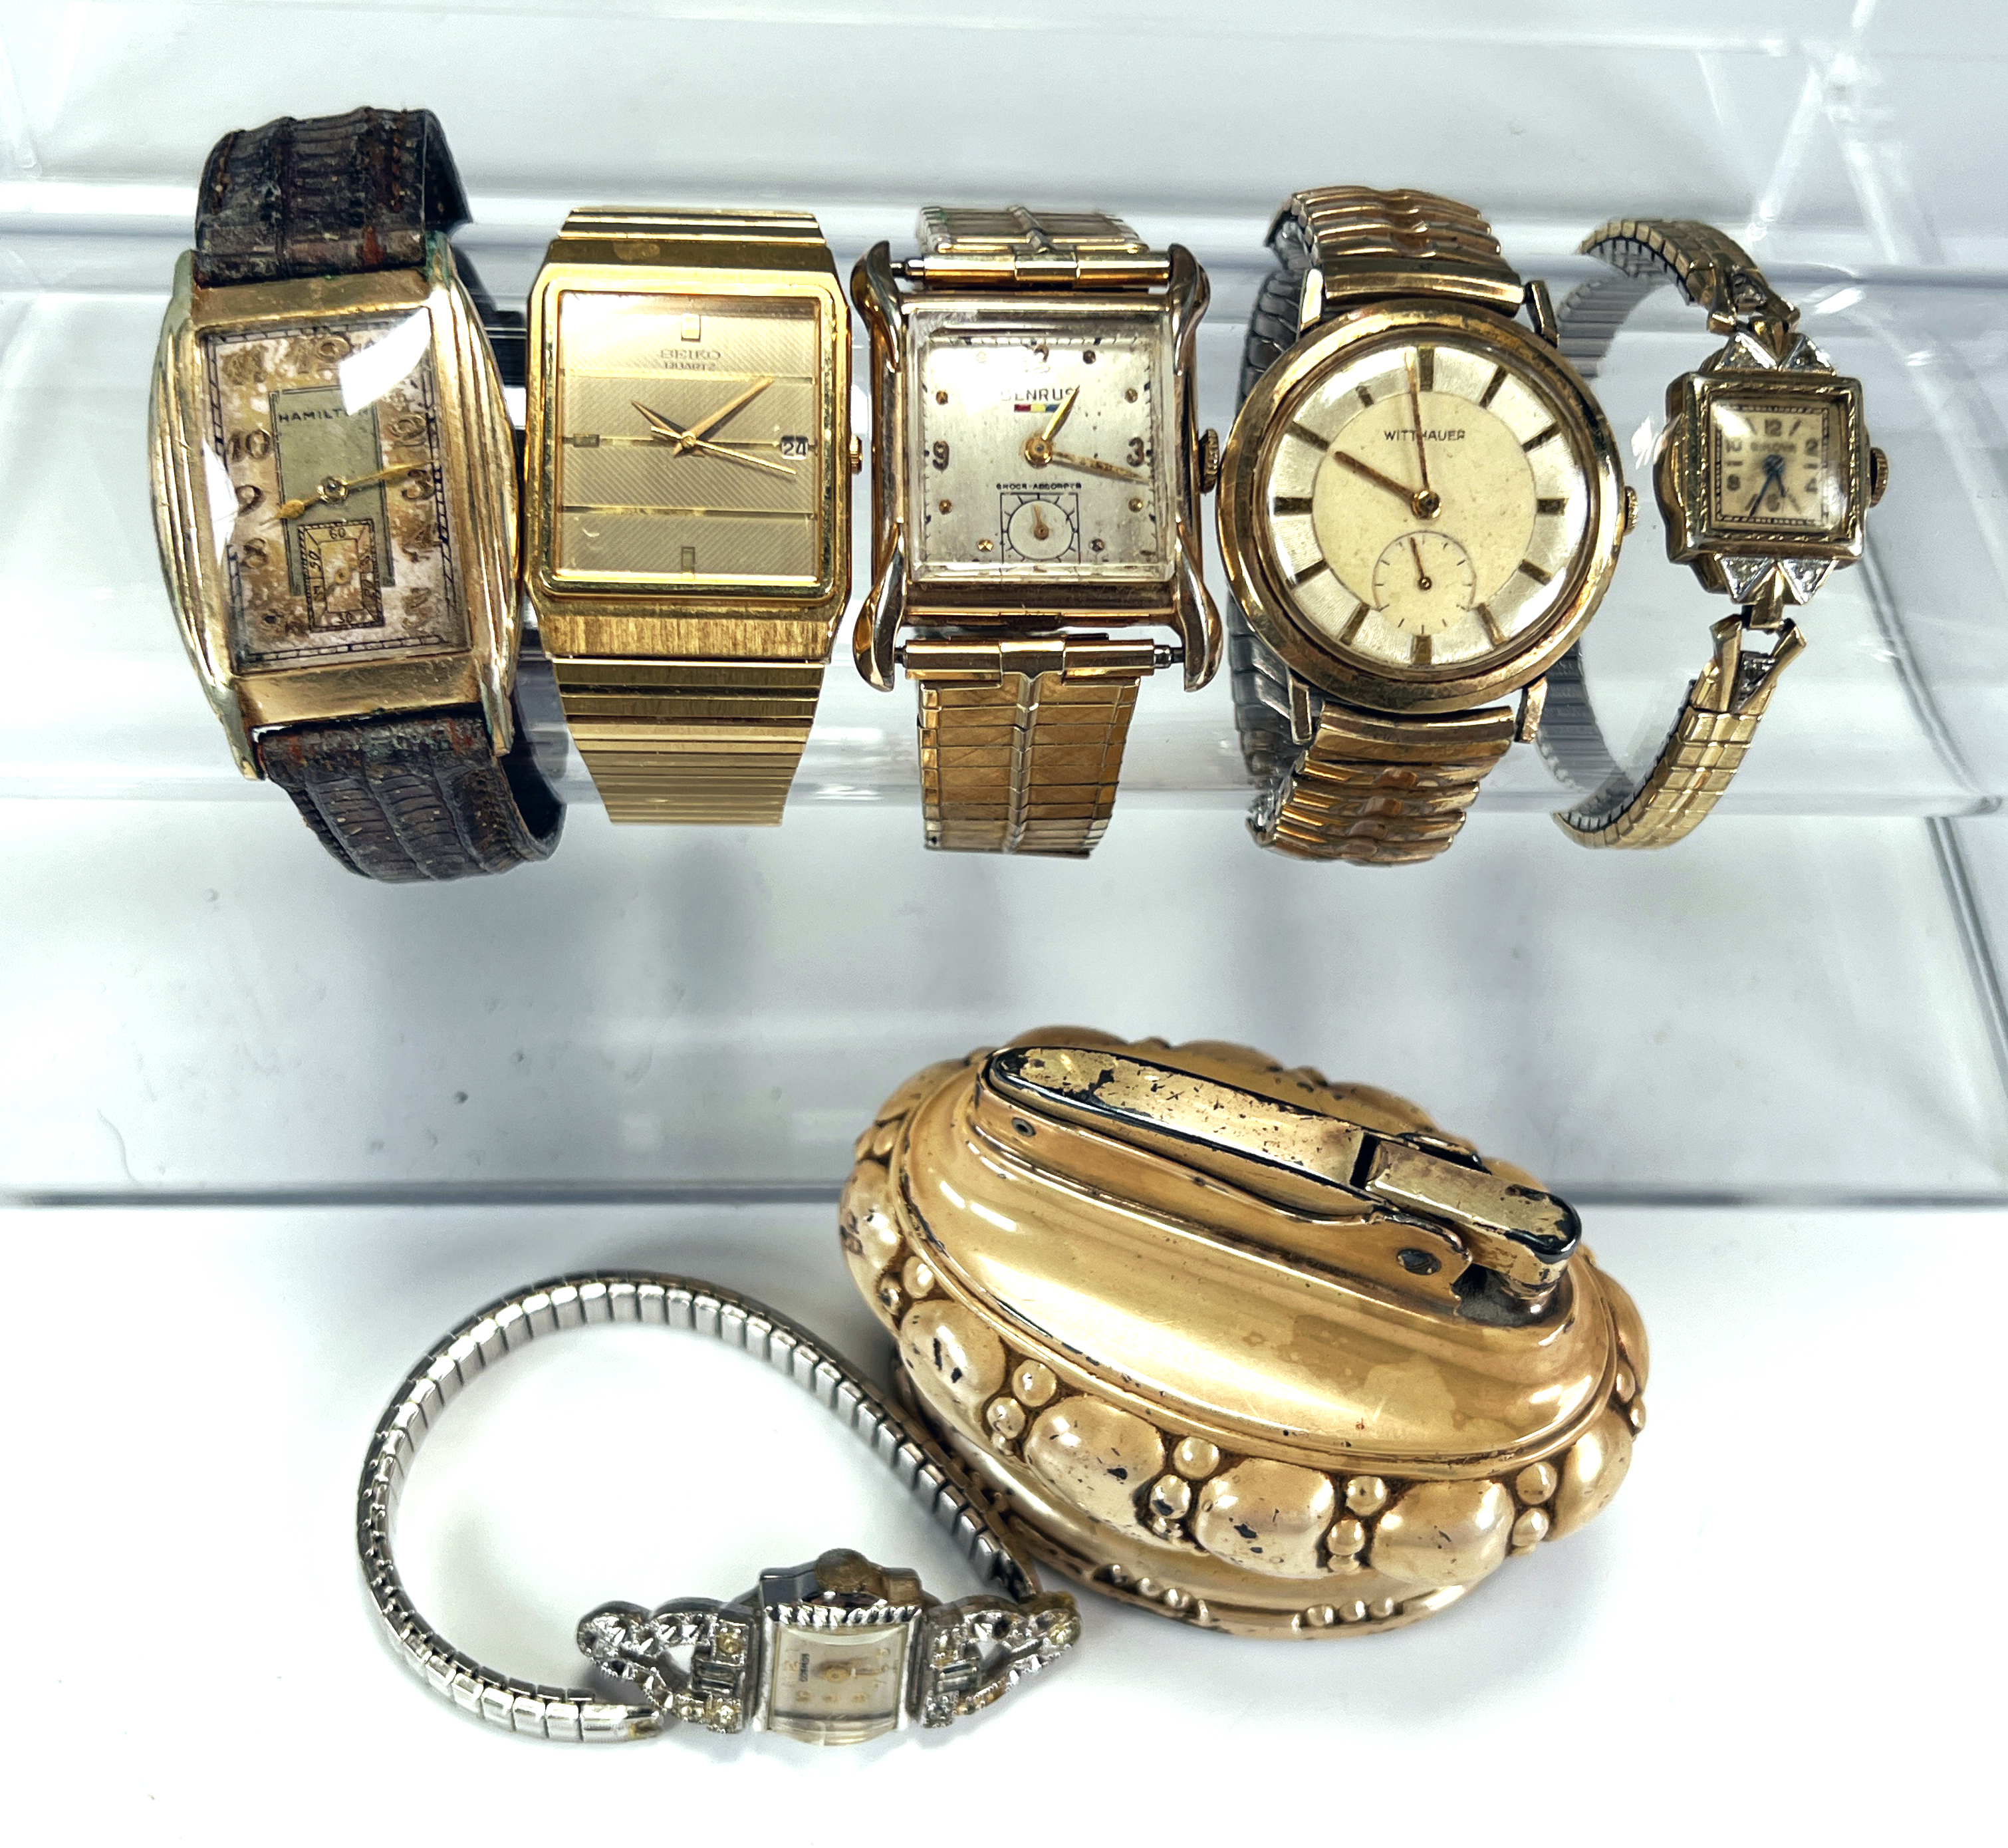 Vintage Menâ€™s And Womenâ€™s Watches & Lighter image 1